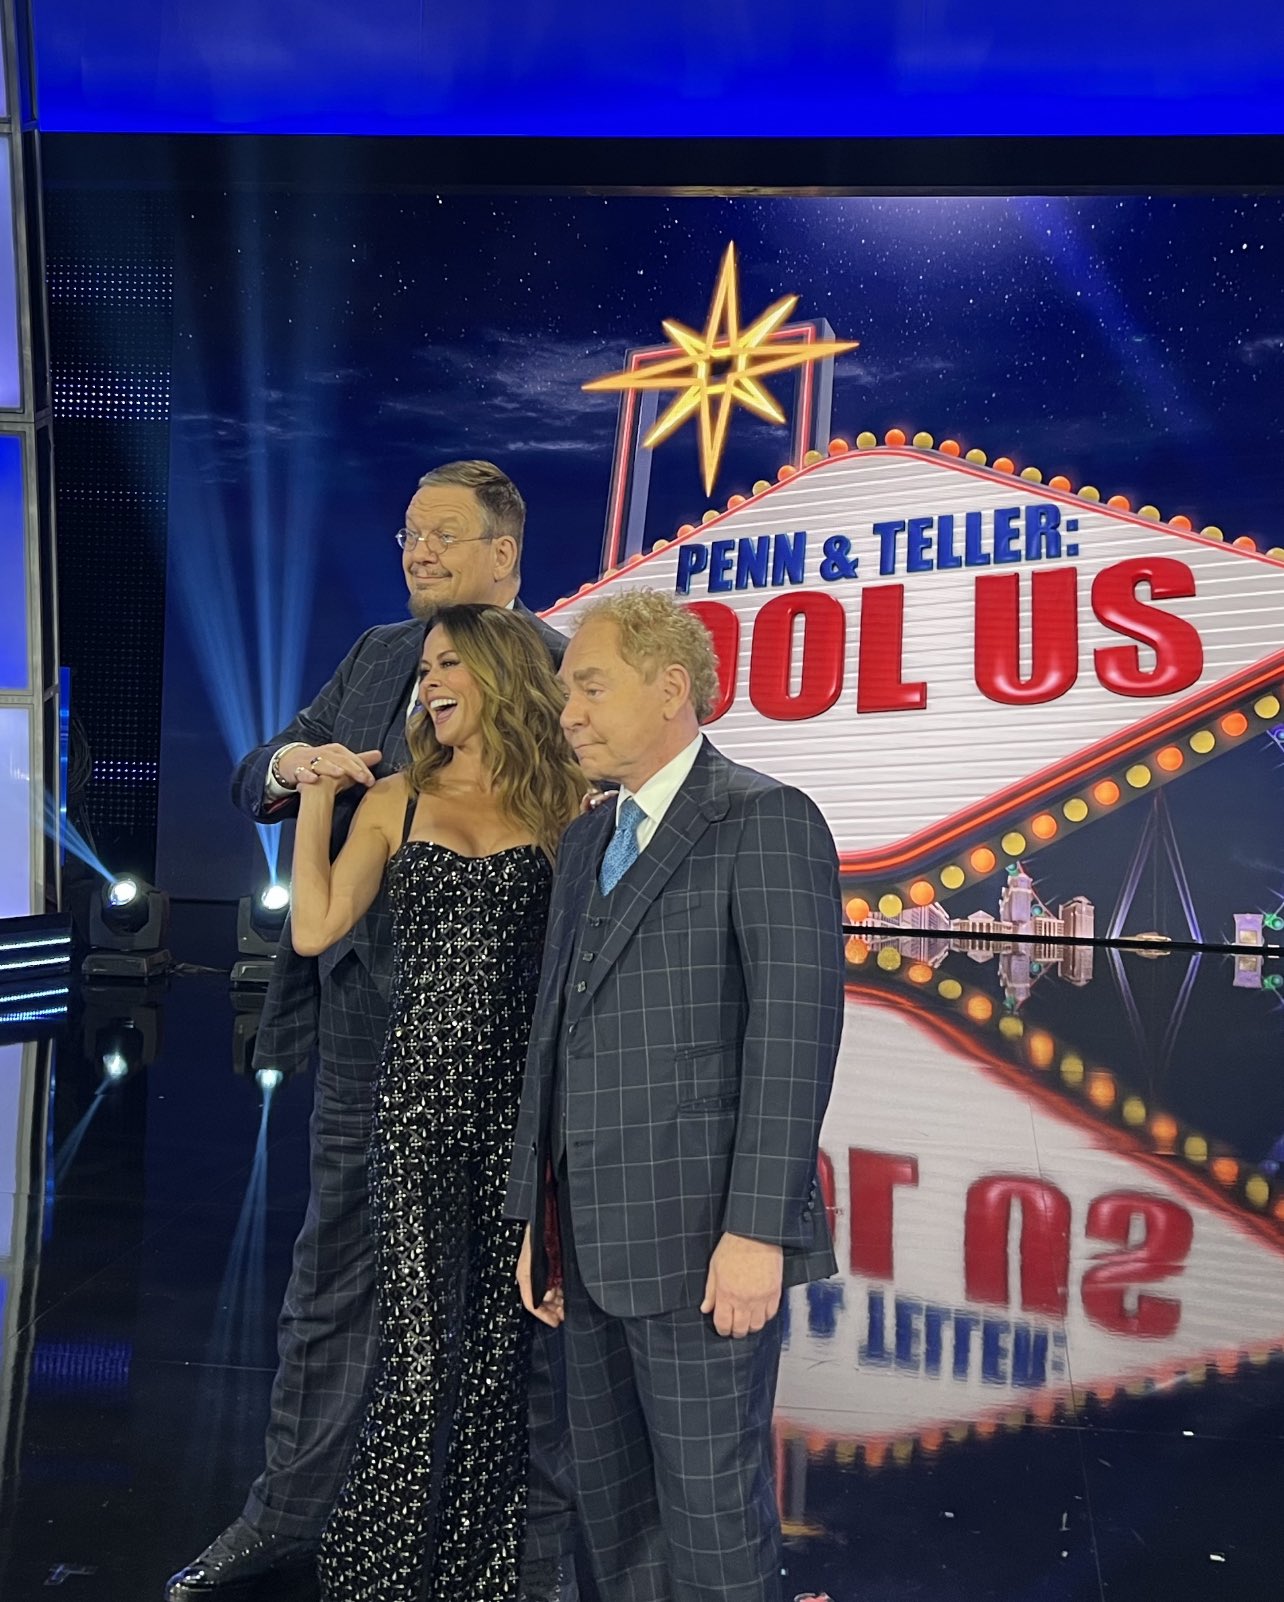 Penn Jillette on X: Join us for the premiere of season 10 of Penn & Teller  #FoolUs on Friday at 8PM on @TheCW with our new host @BrookeBurke!  @MrTeller #pennandteller  /